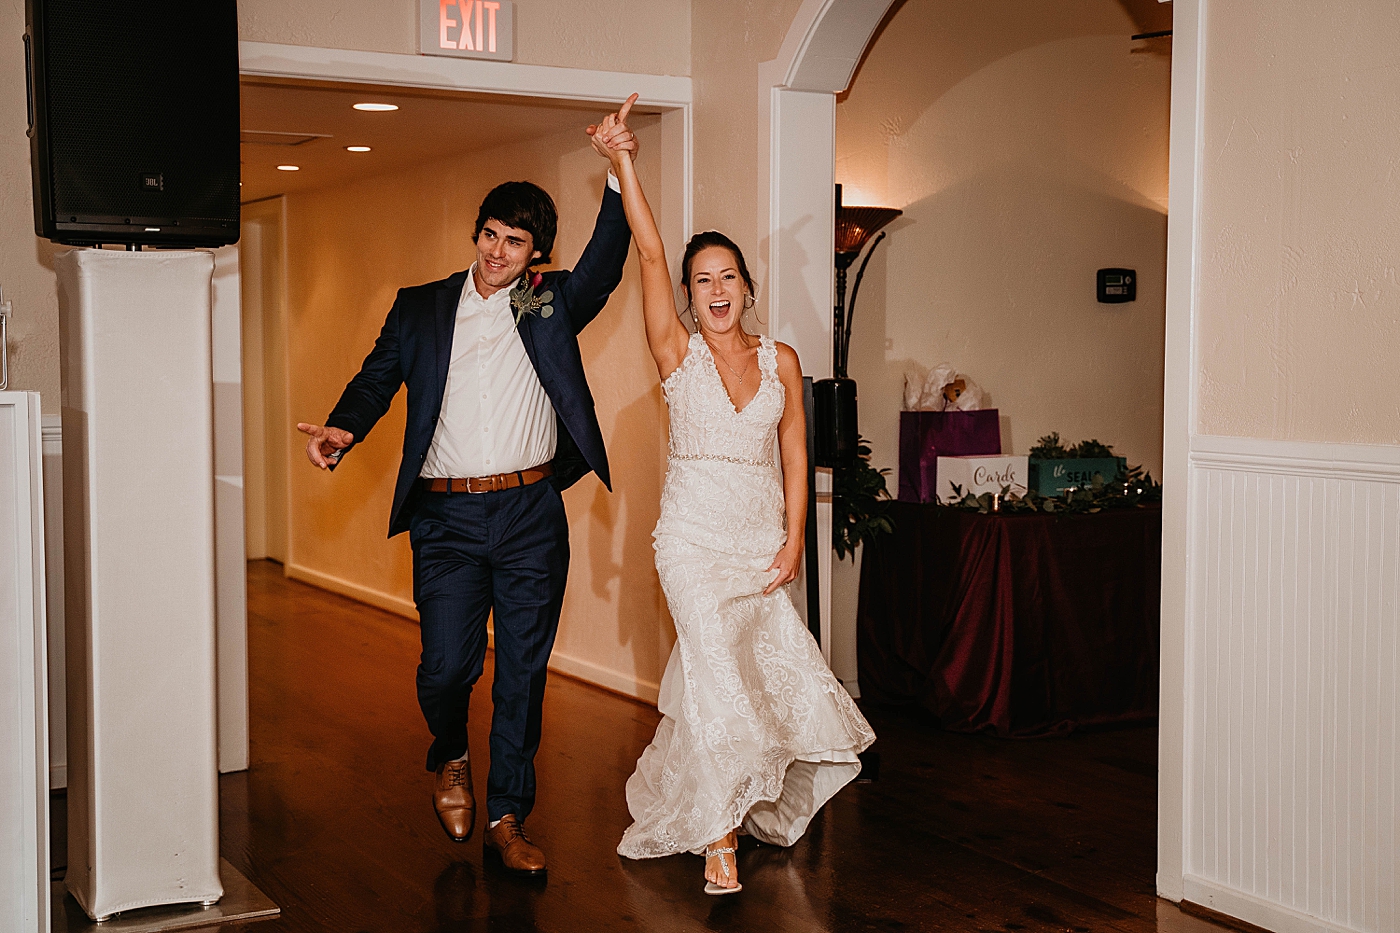 Bride and Groom having a fun entrance into Reception Out of the Blue Celebrations Wedding Photography captured by South Florida Wedding Photographer Krystal Capone Photography 